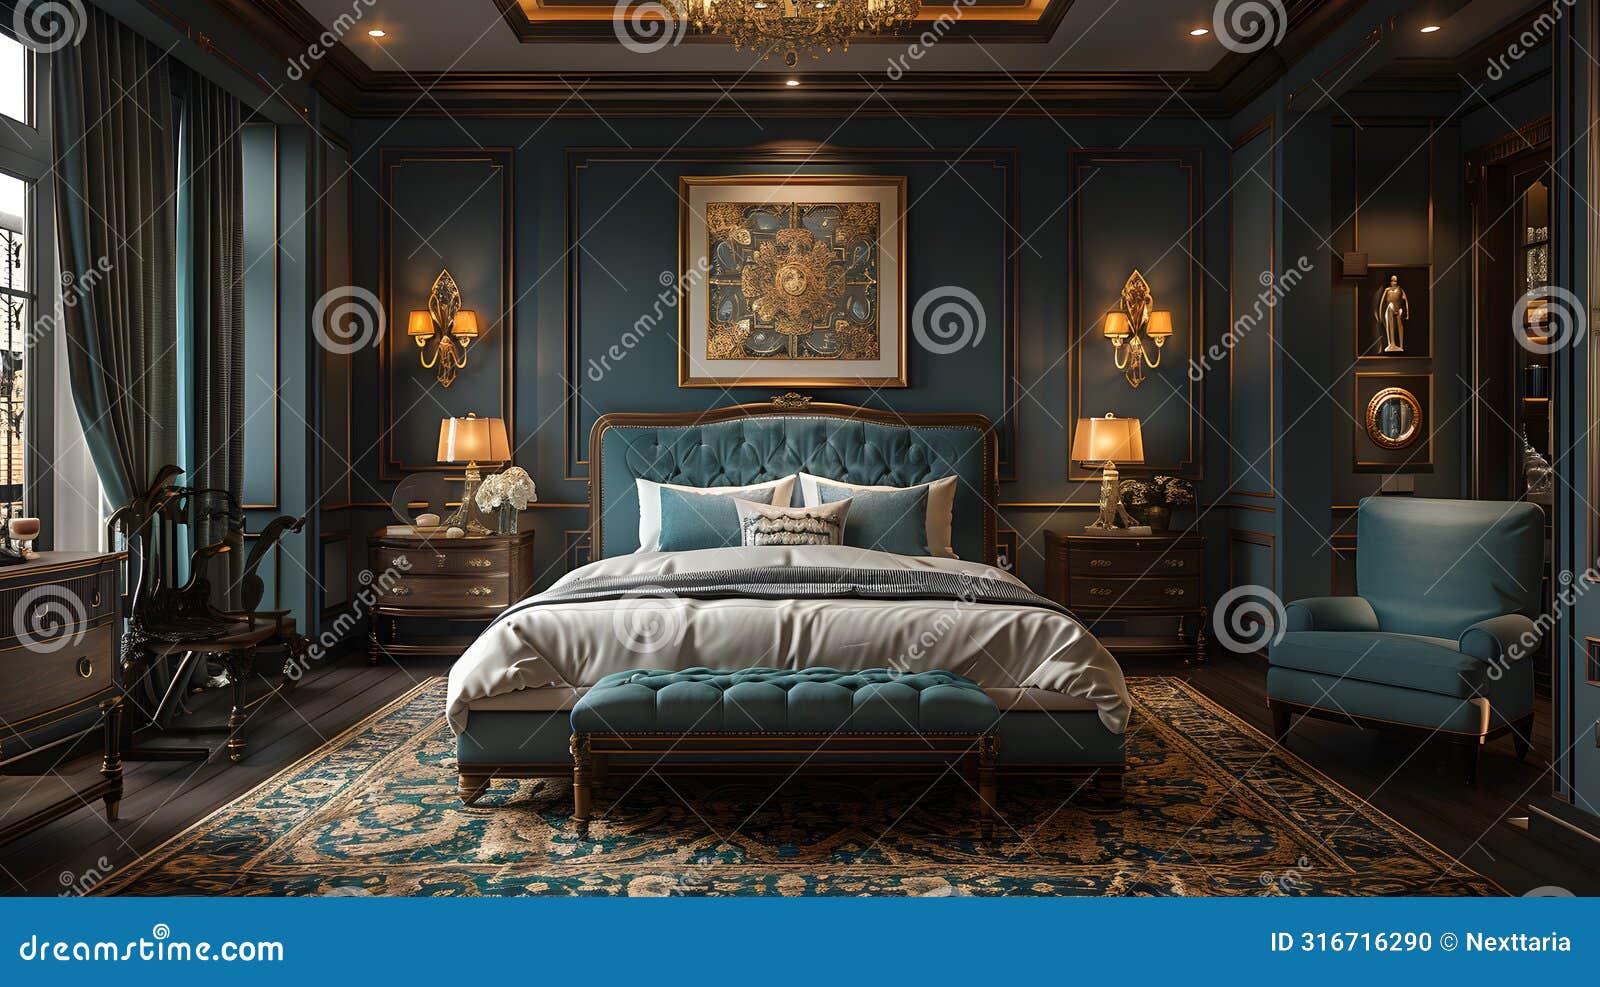 celebratory luxury bedchamber with artistic accents